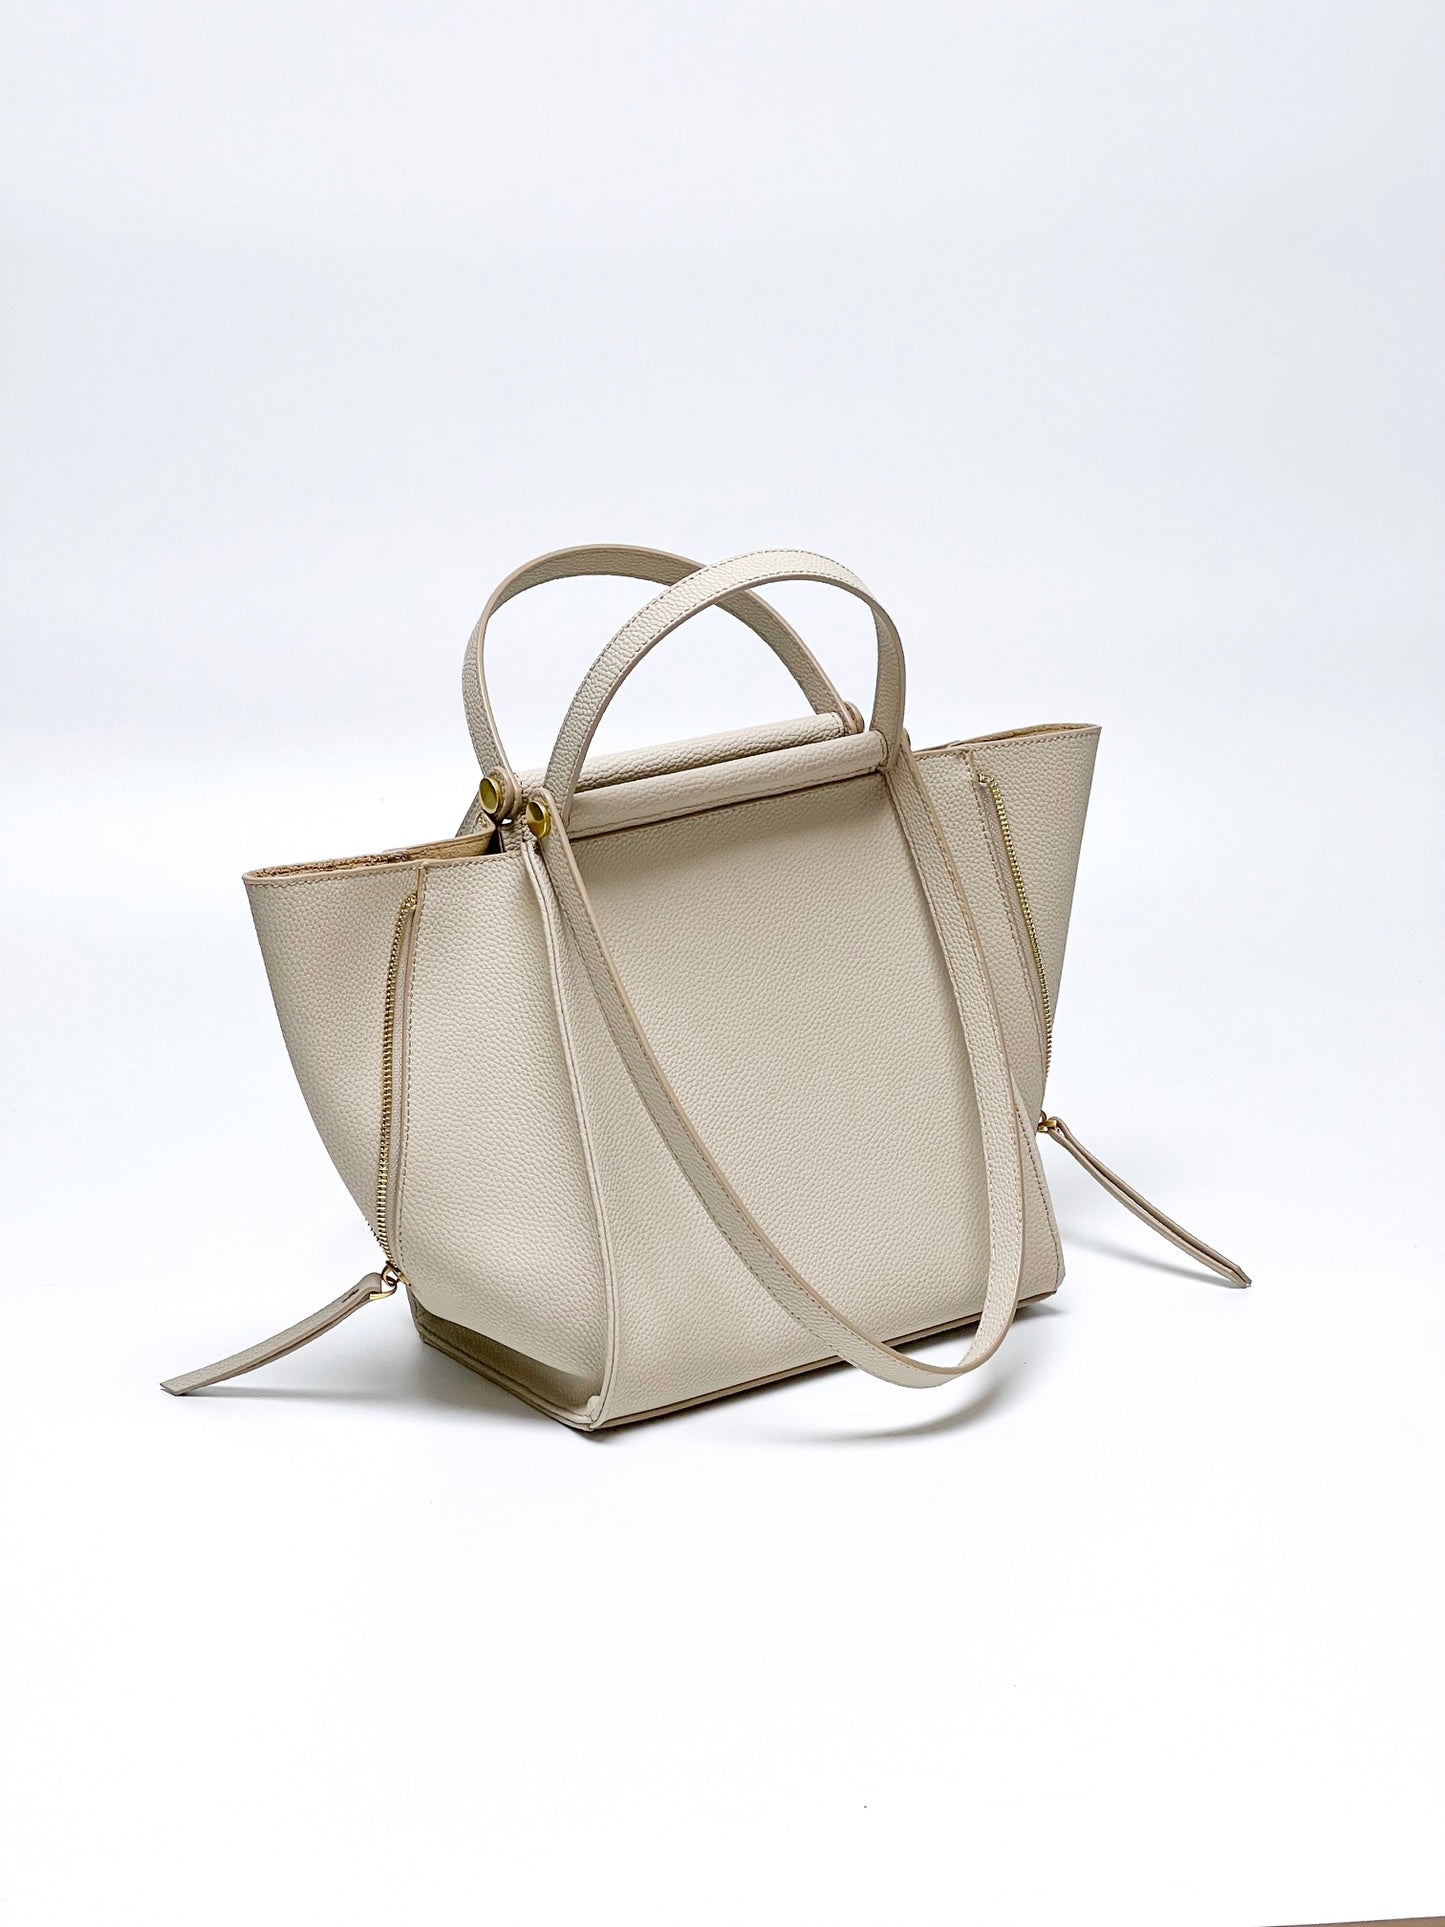 Winged Elegance Leather Tote